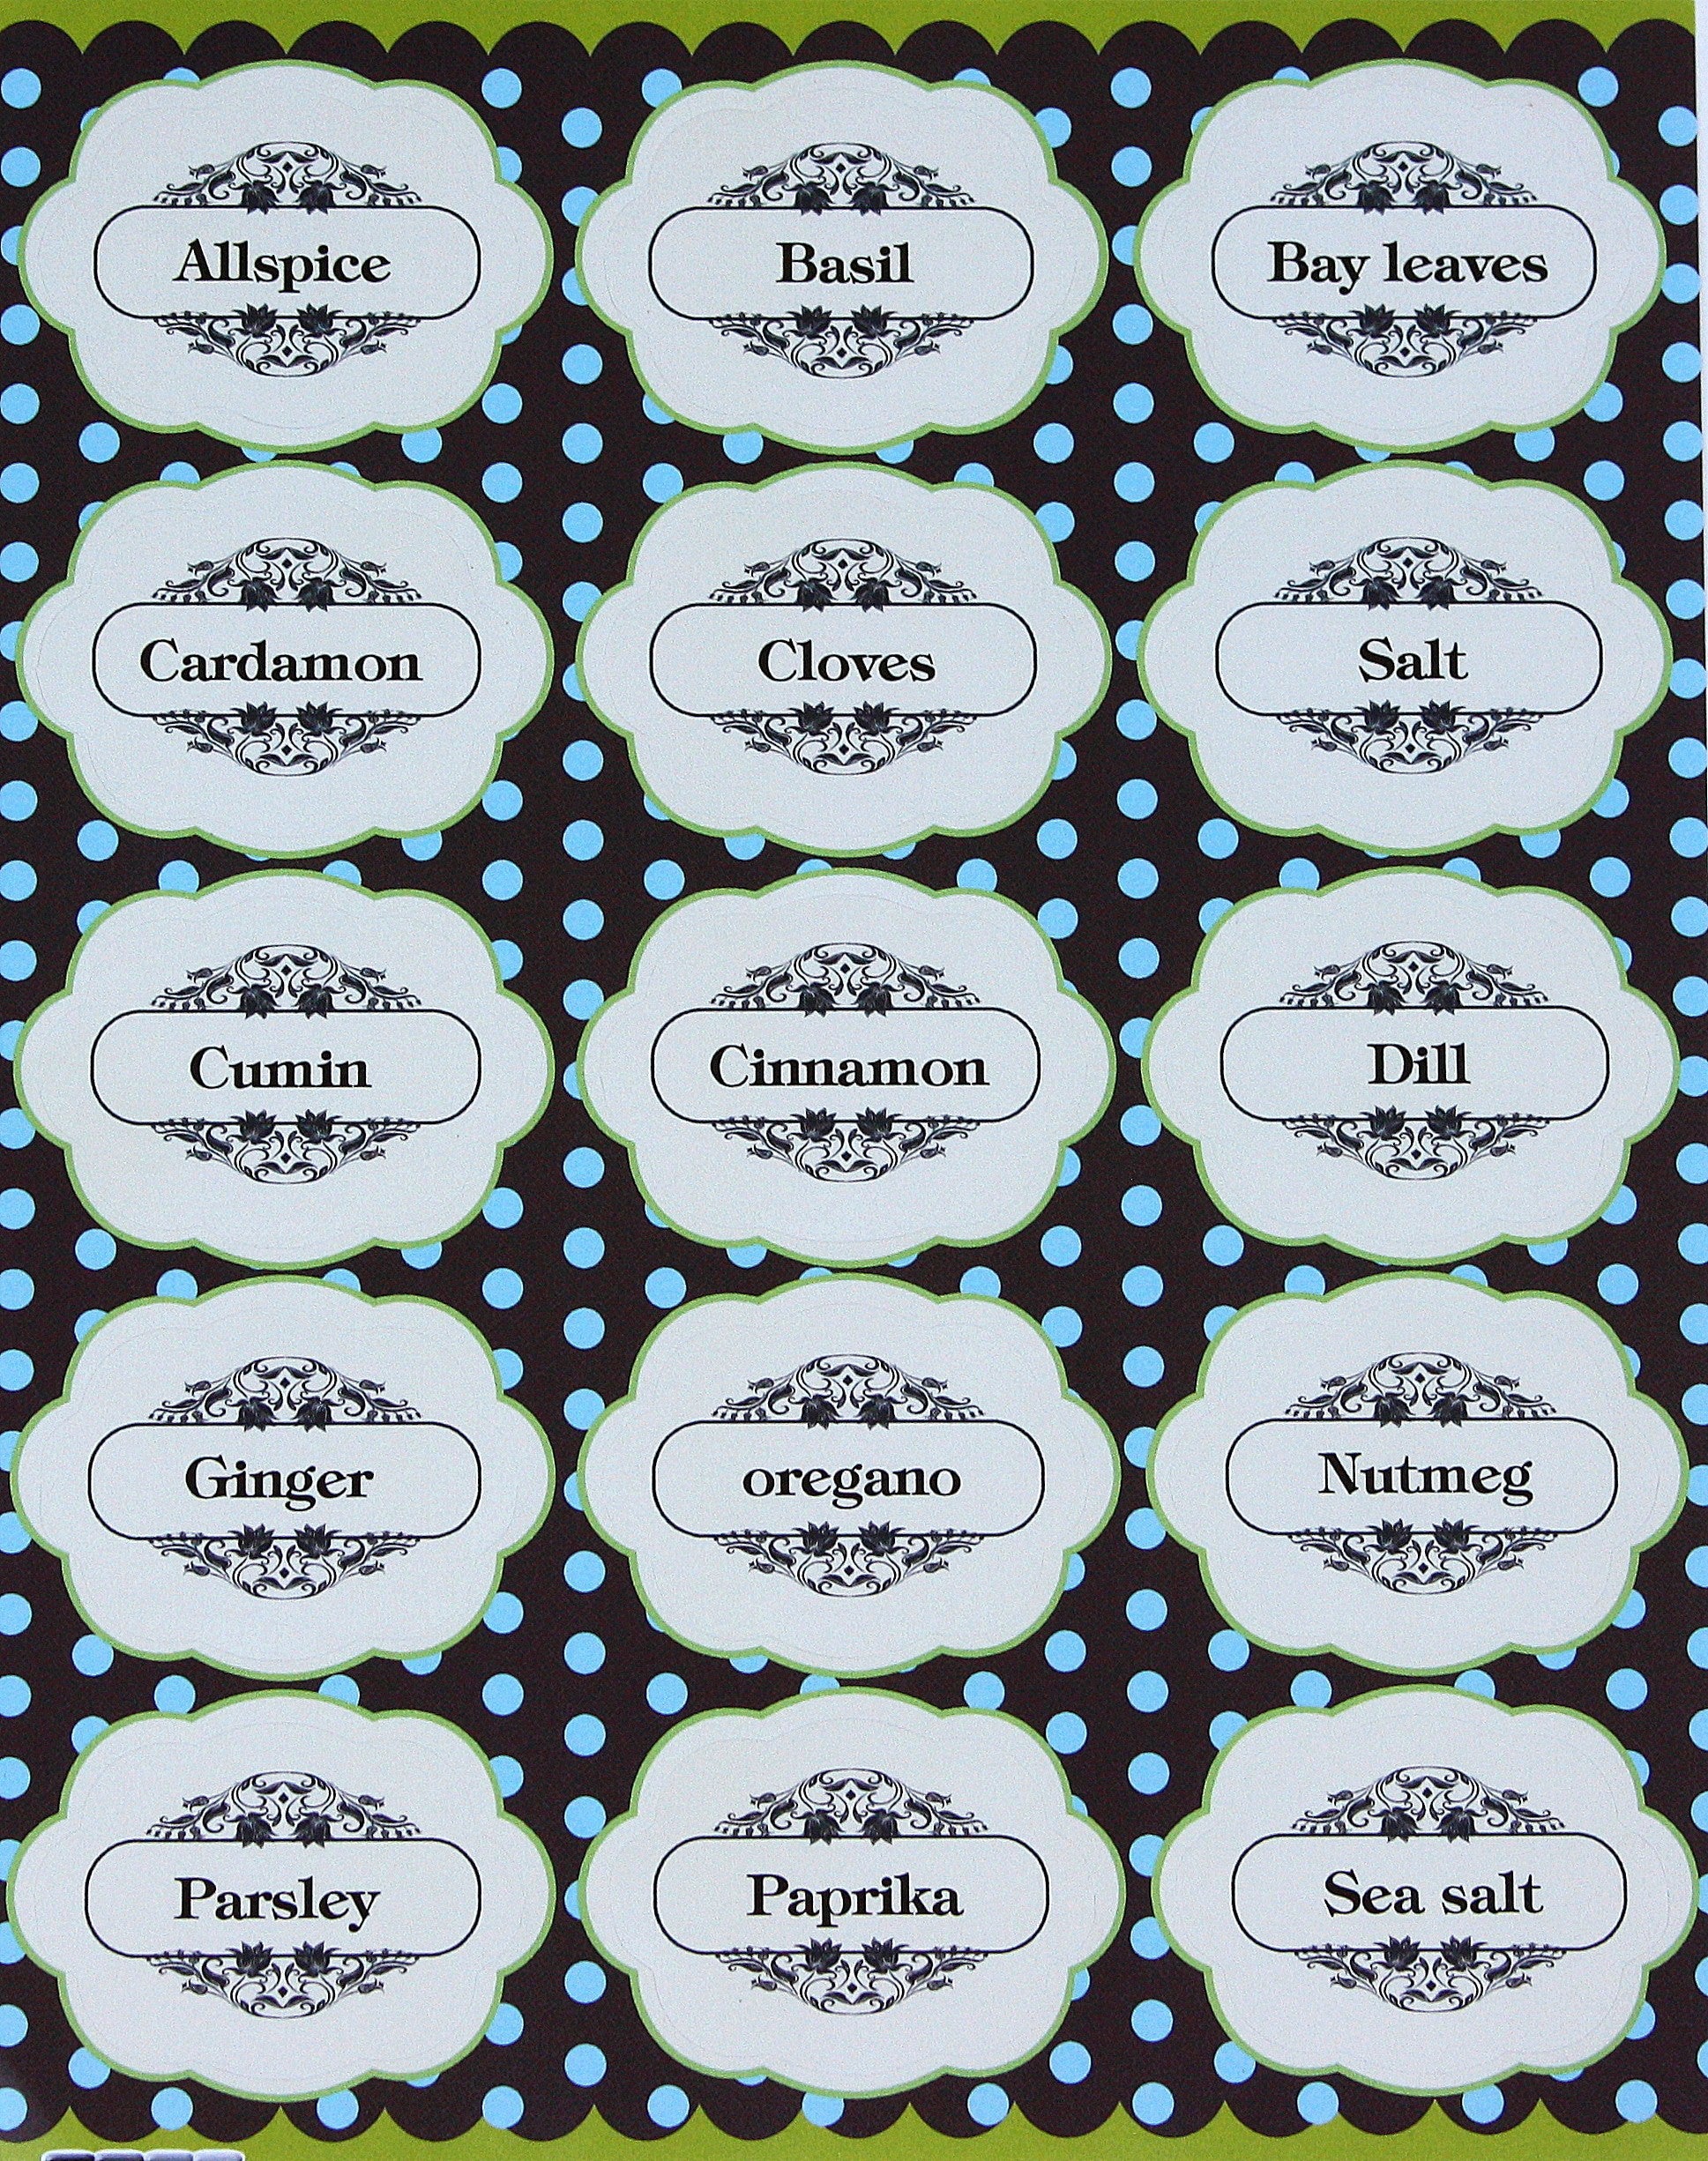 Blank & Spice Colored Stickers Kitchen Jars Labels – Royal Green